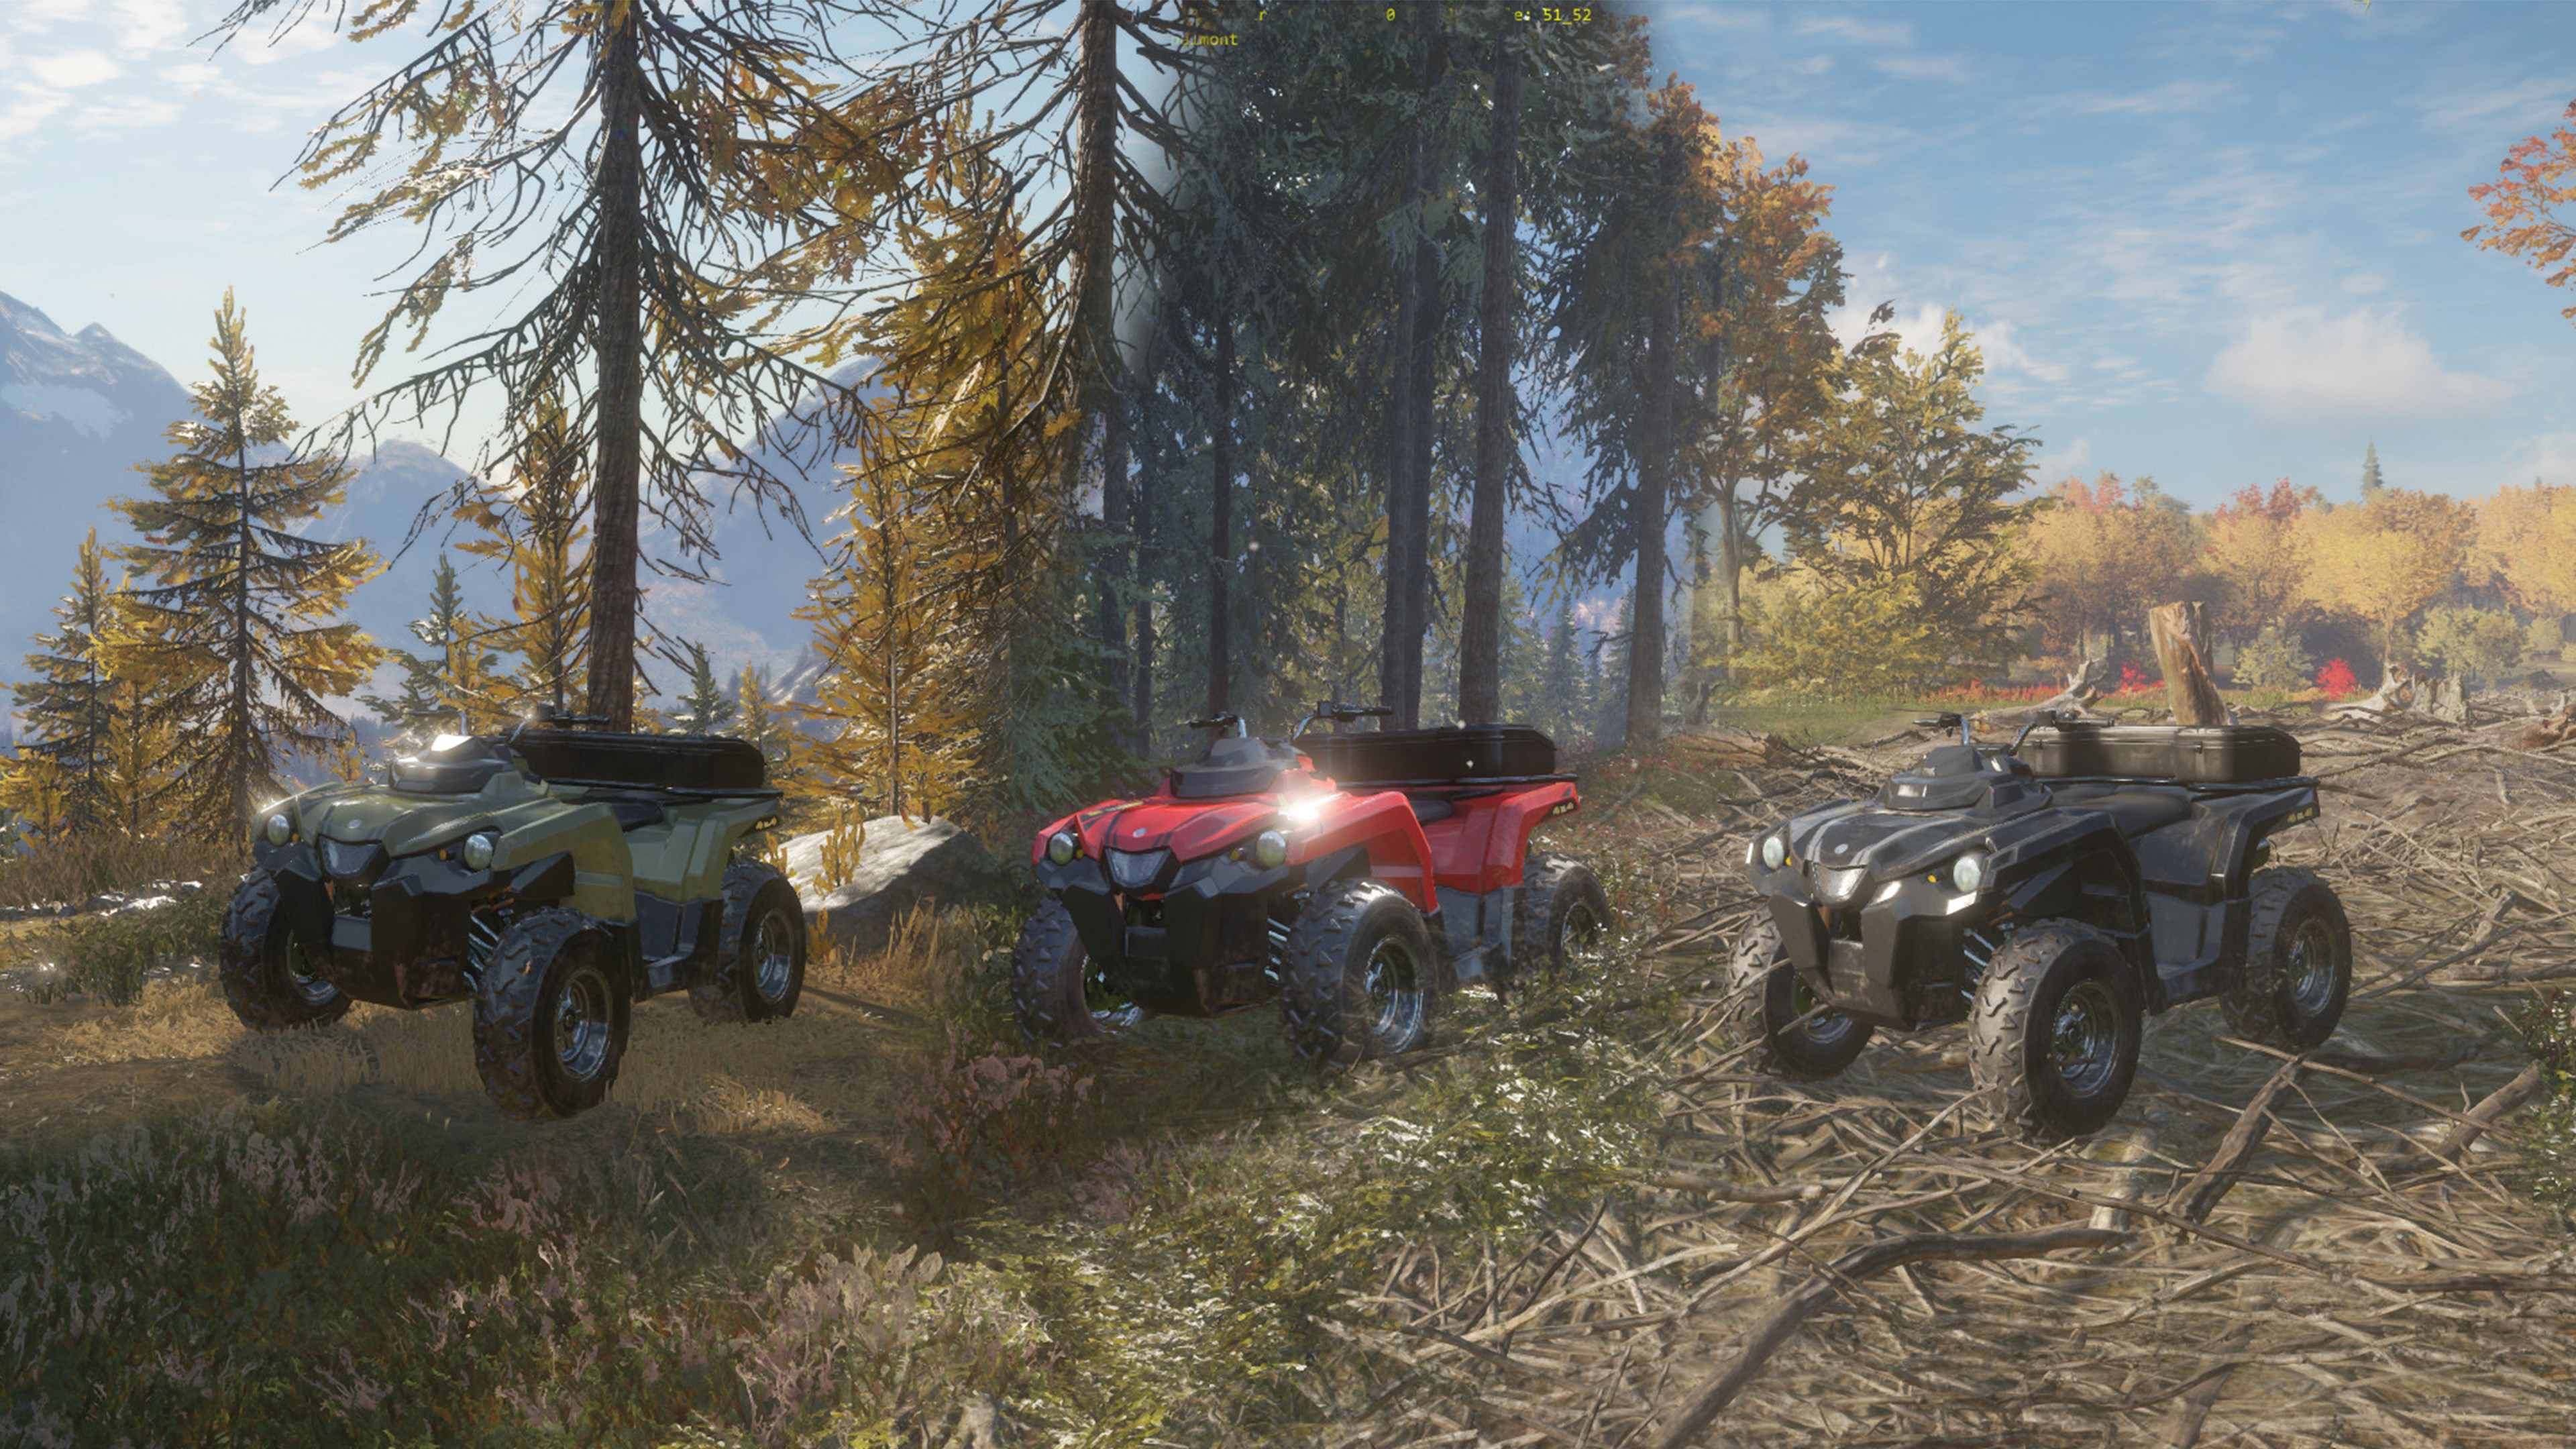 Call of the wild epic games. THEHUNTER Call of the Wild - atv saber 4x4. Игра the Hunter Call of the Wild. The Hunter Call of the Wild Скриншоты. Транспорты в the Hunter.